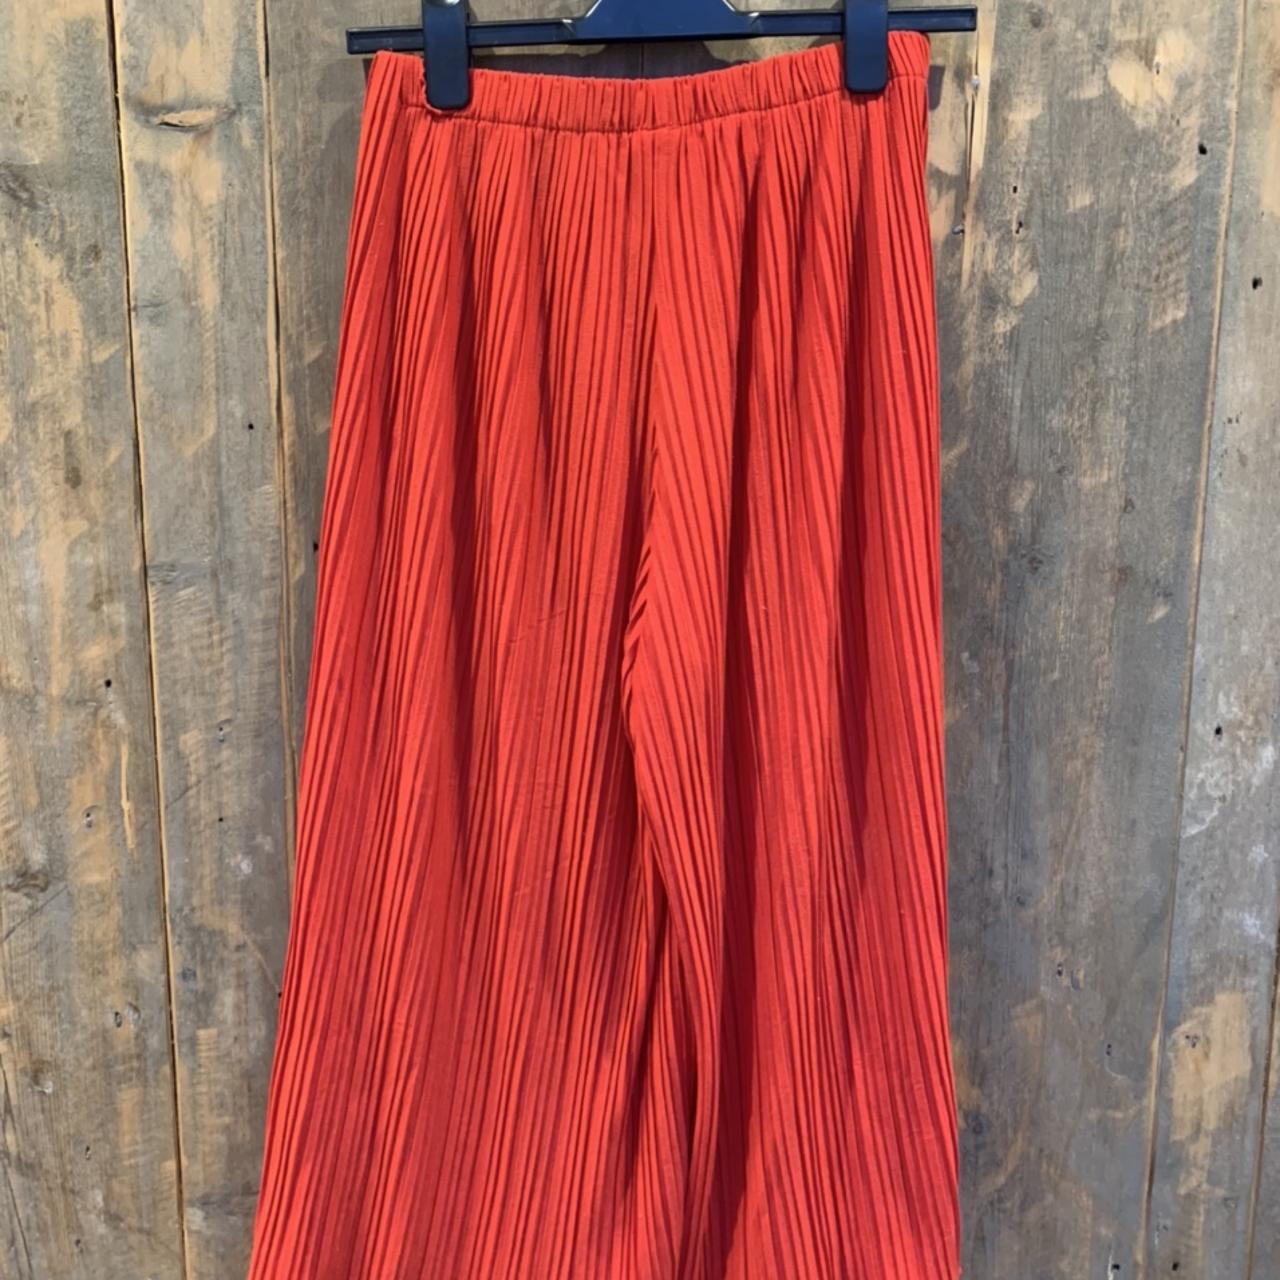 Zara pleated red trousers ️ ️ Size is 13/14 but... - Depop